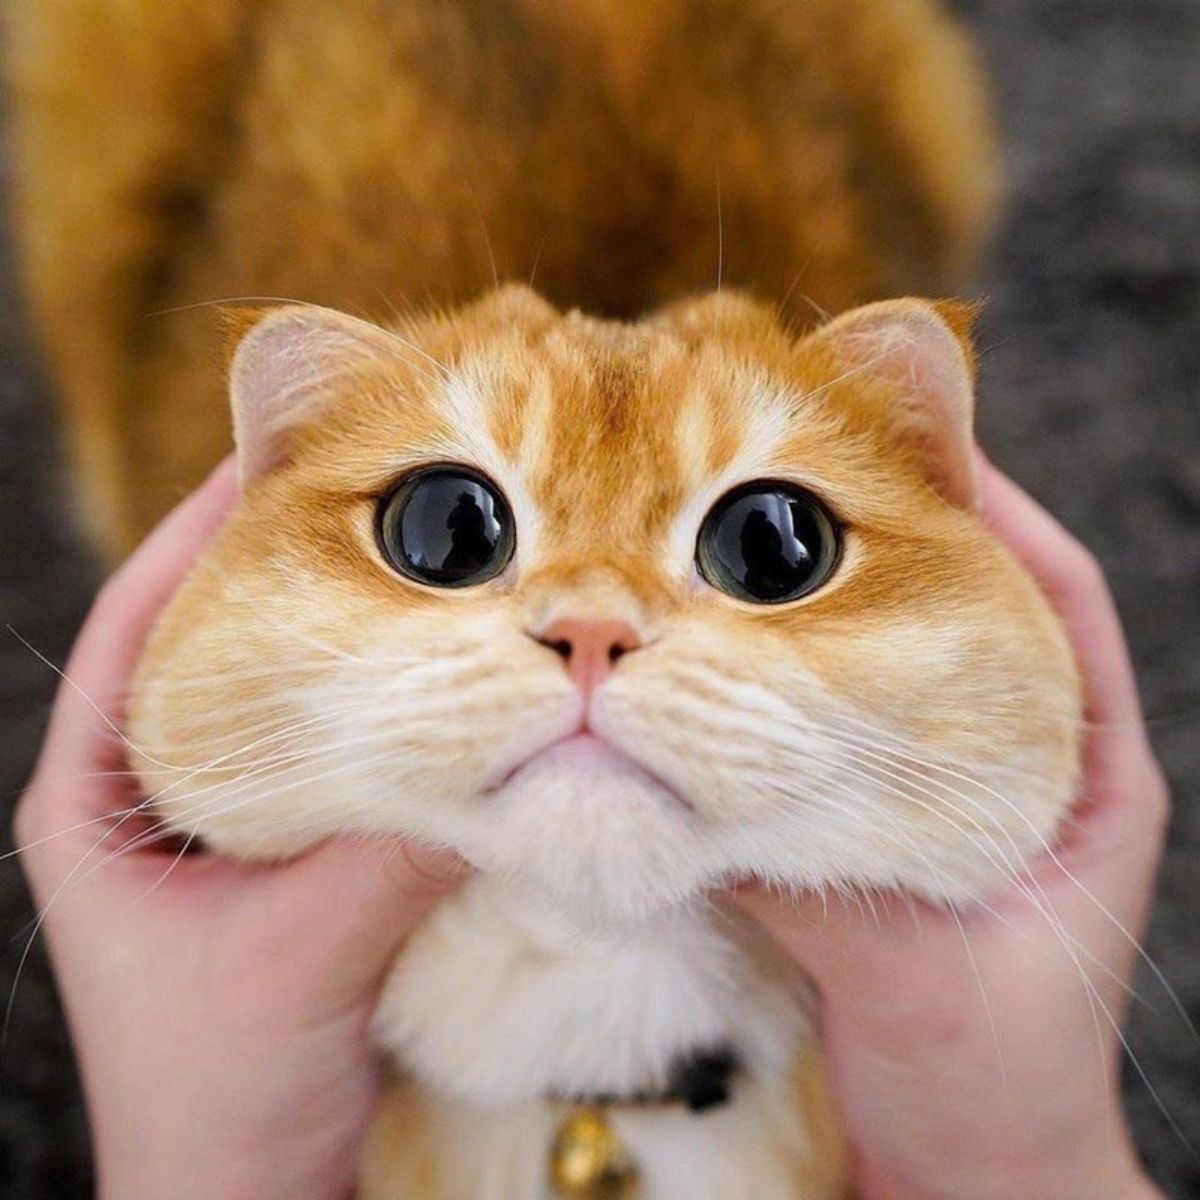 an orange and white cat with big eyes and fluffy cheeks